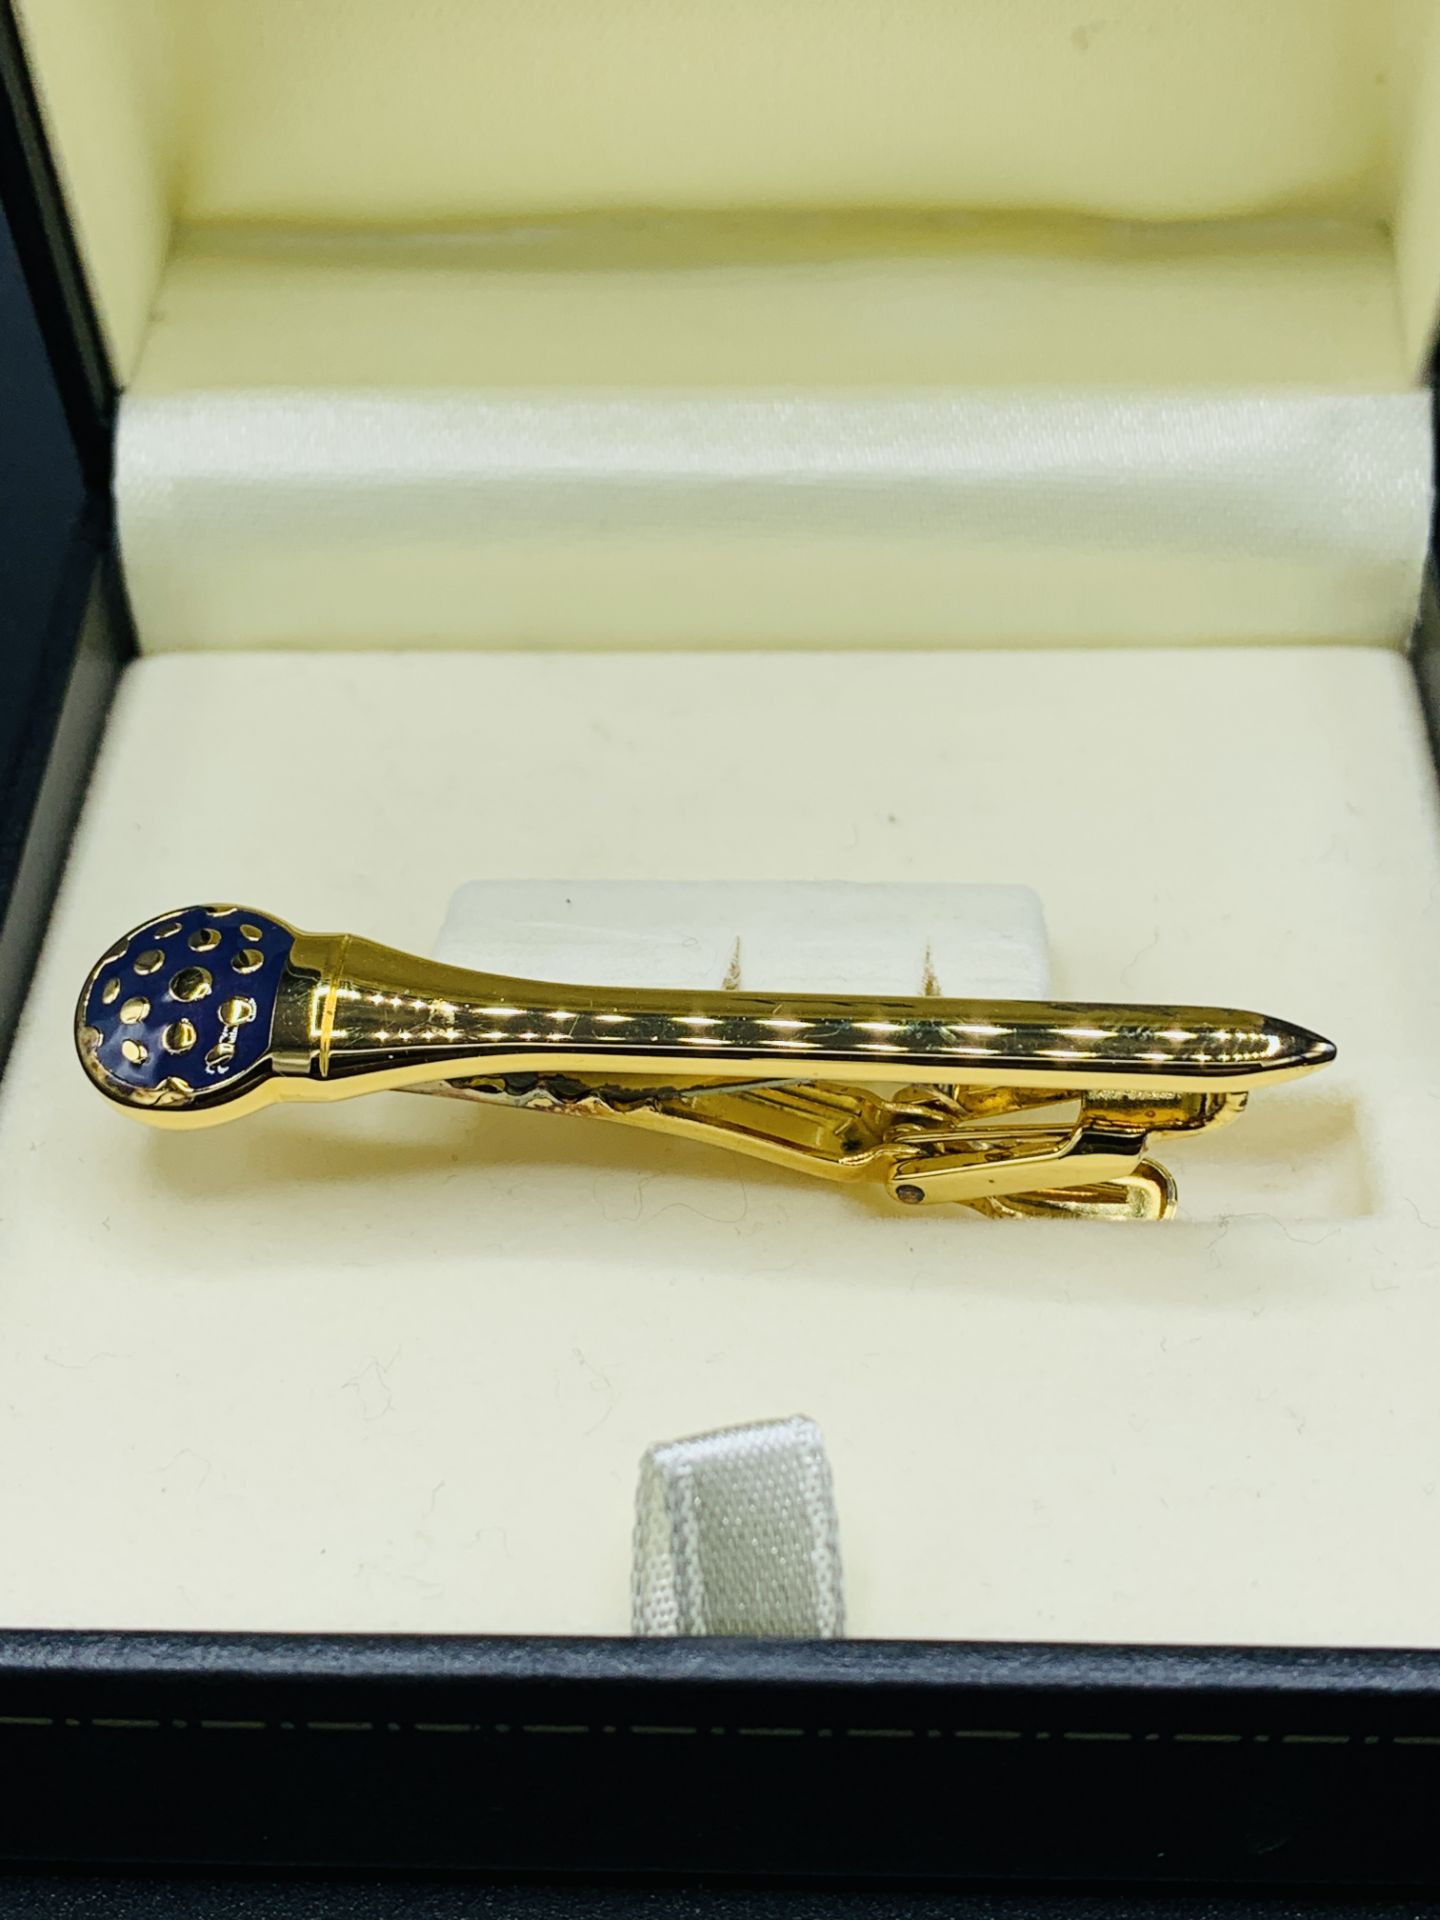 New Dunhill tie clip marked 925 - Image 2 of 2